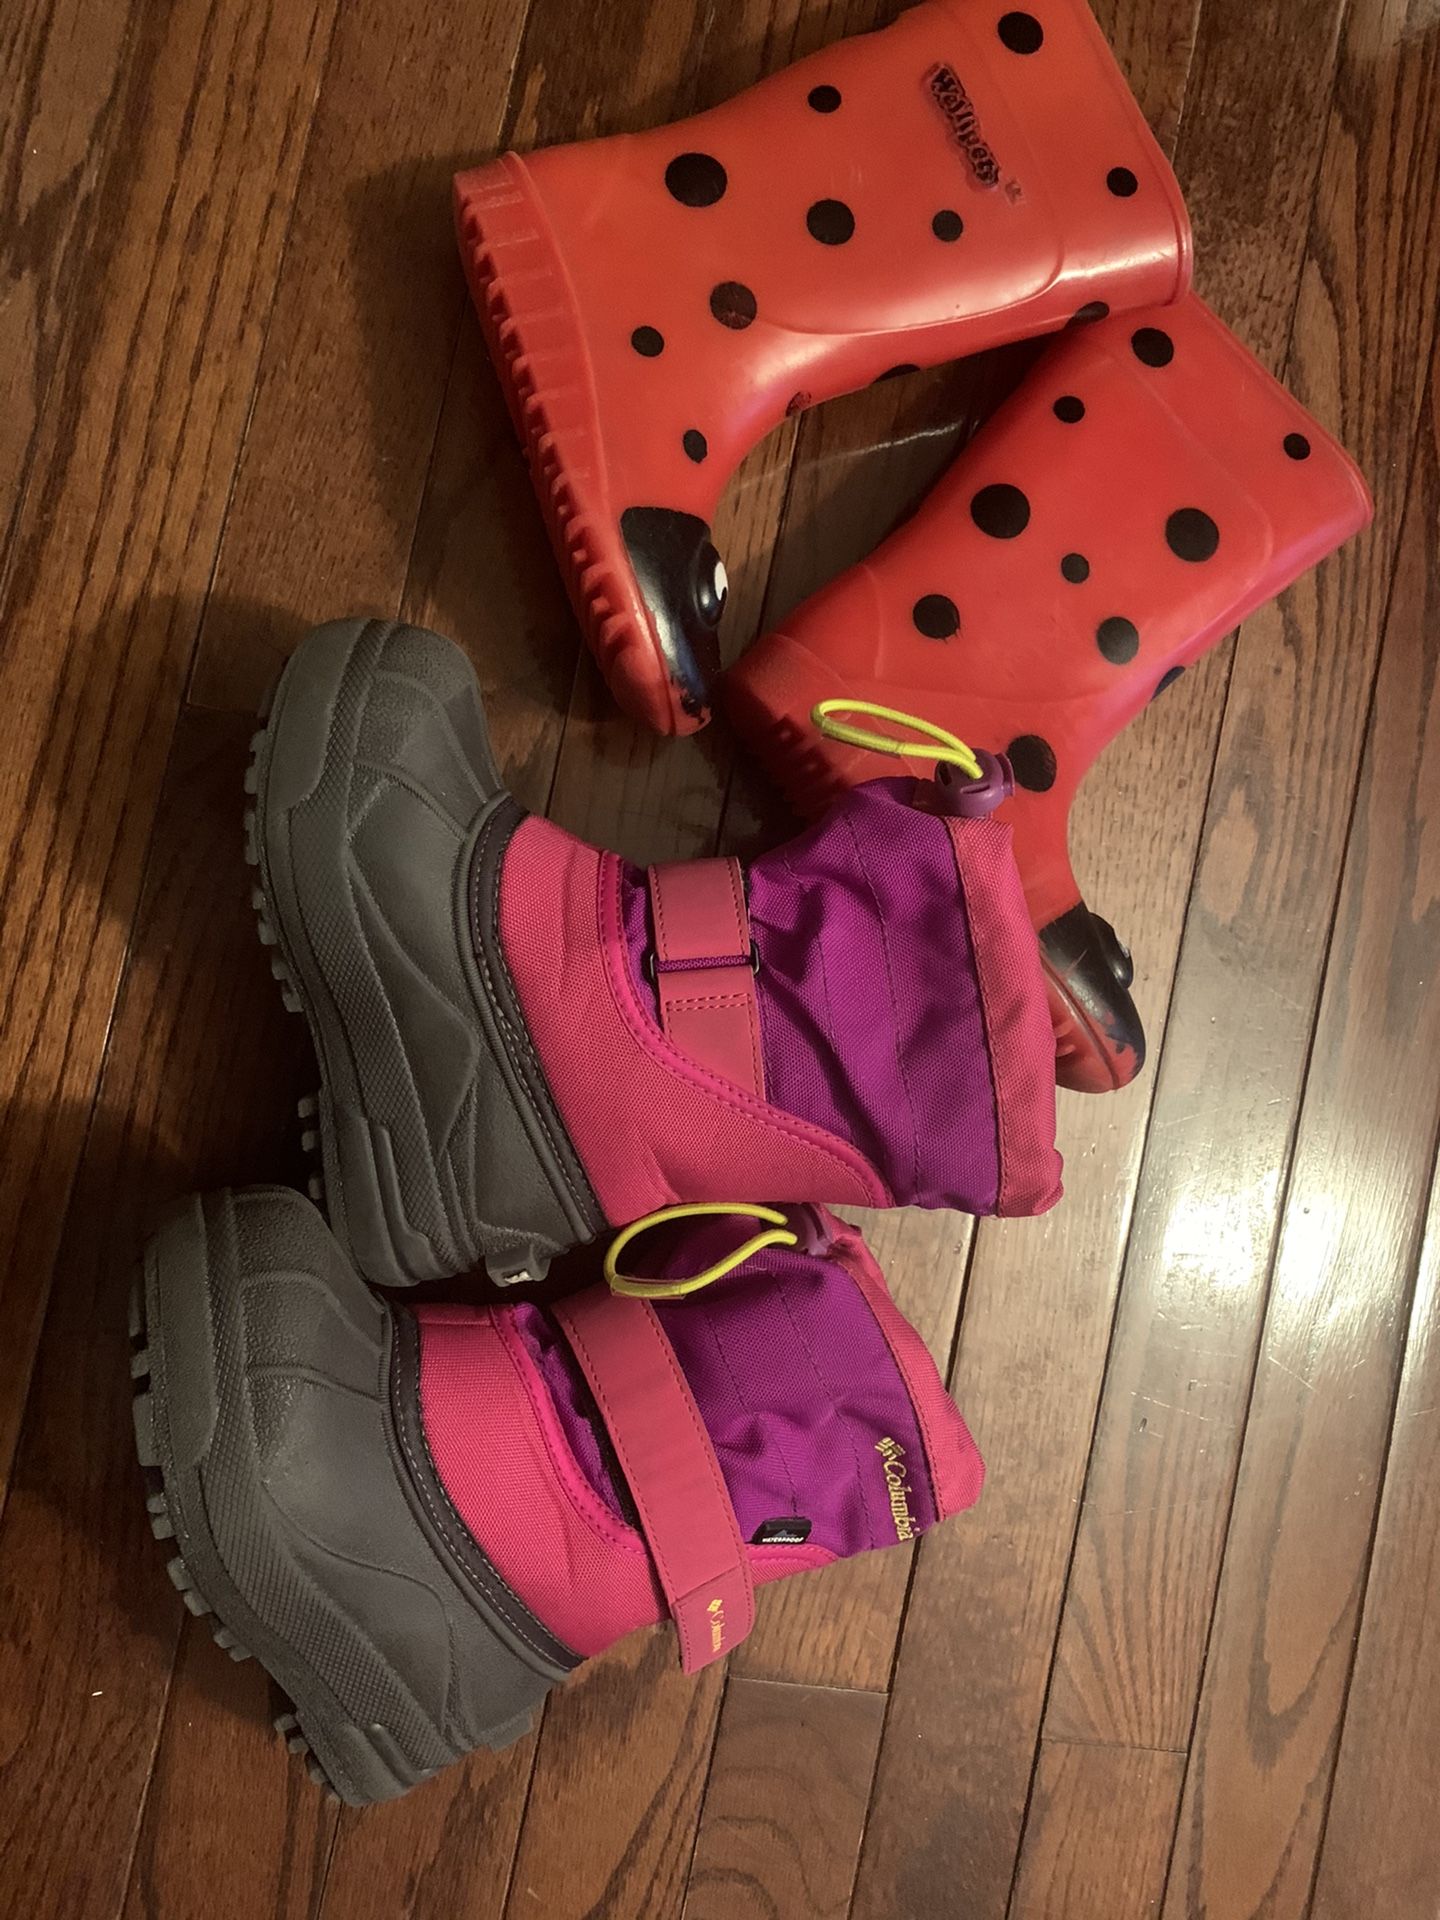 Columbia Winter shoes and rain shoe for girls size 9